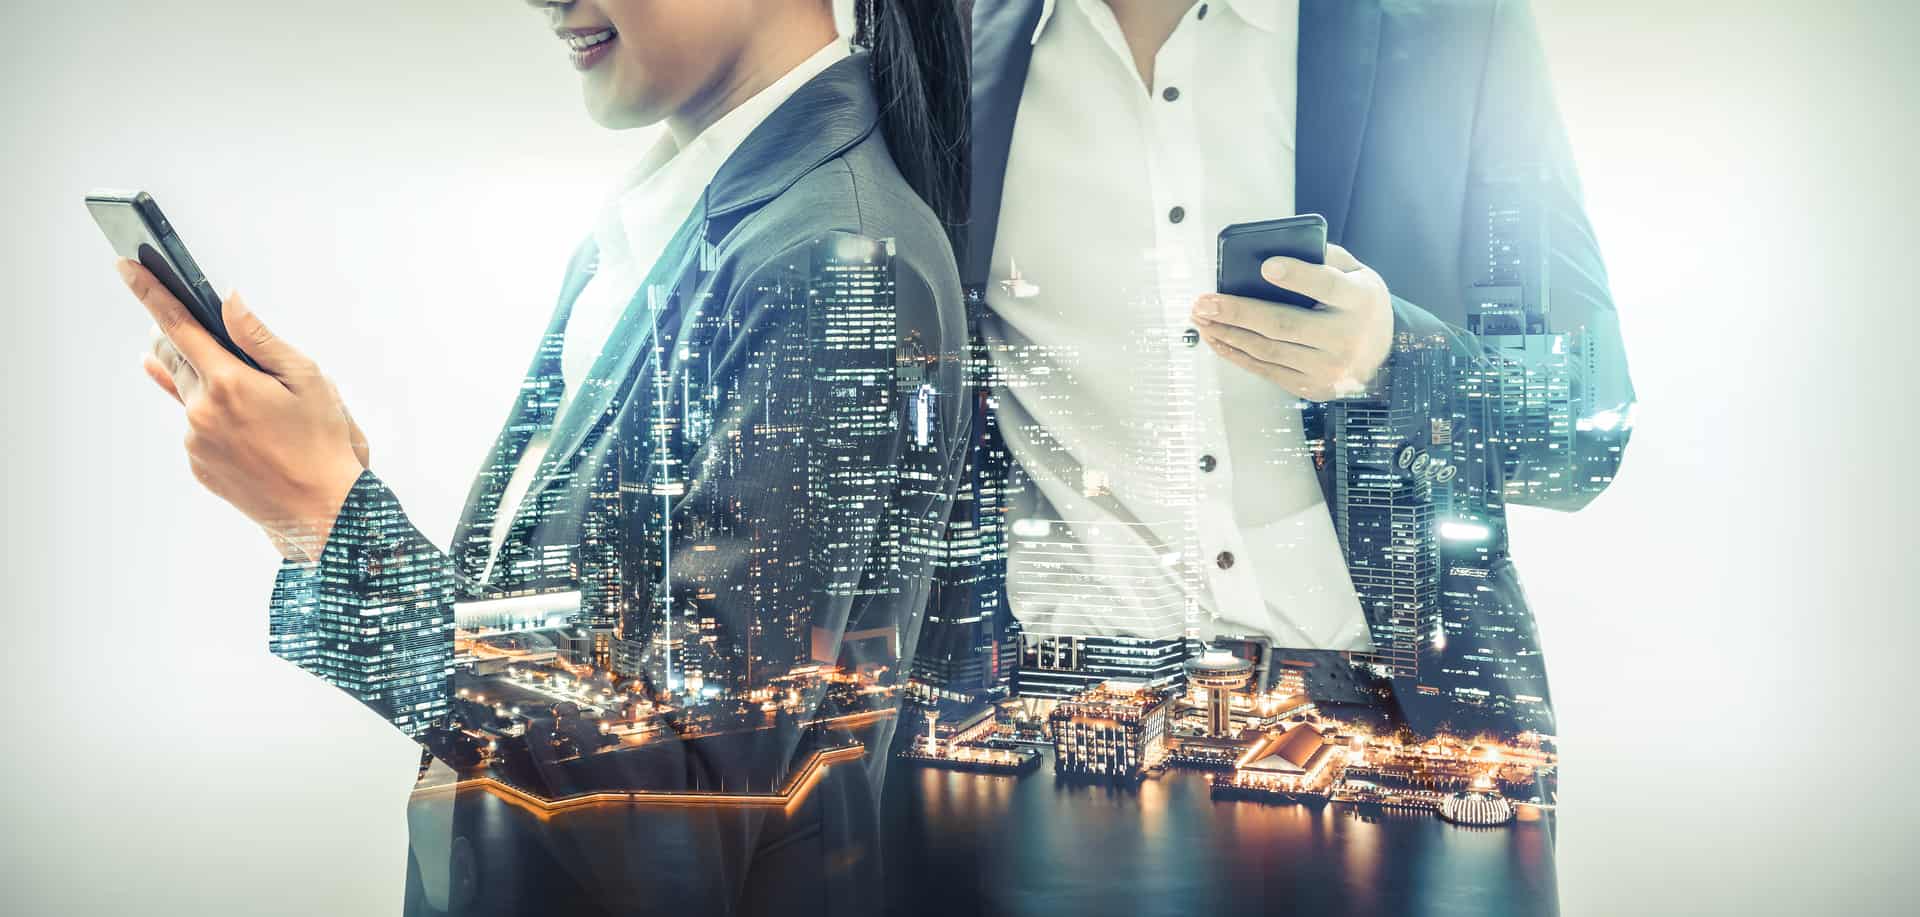 Double exposure of businesspeople using smartphones and a busy city representing white label SMS gateway services. 